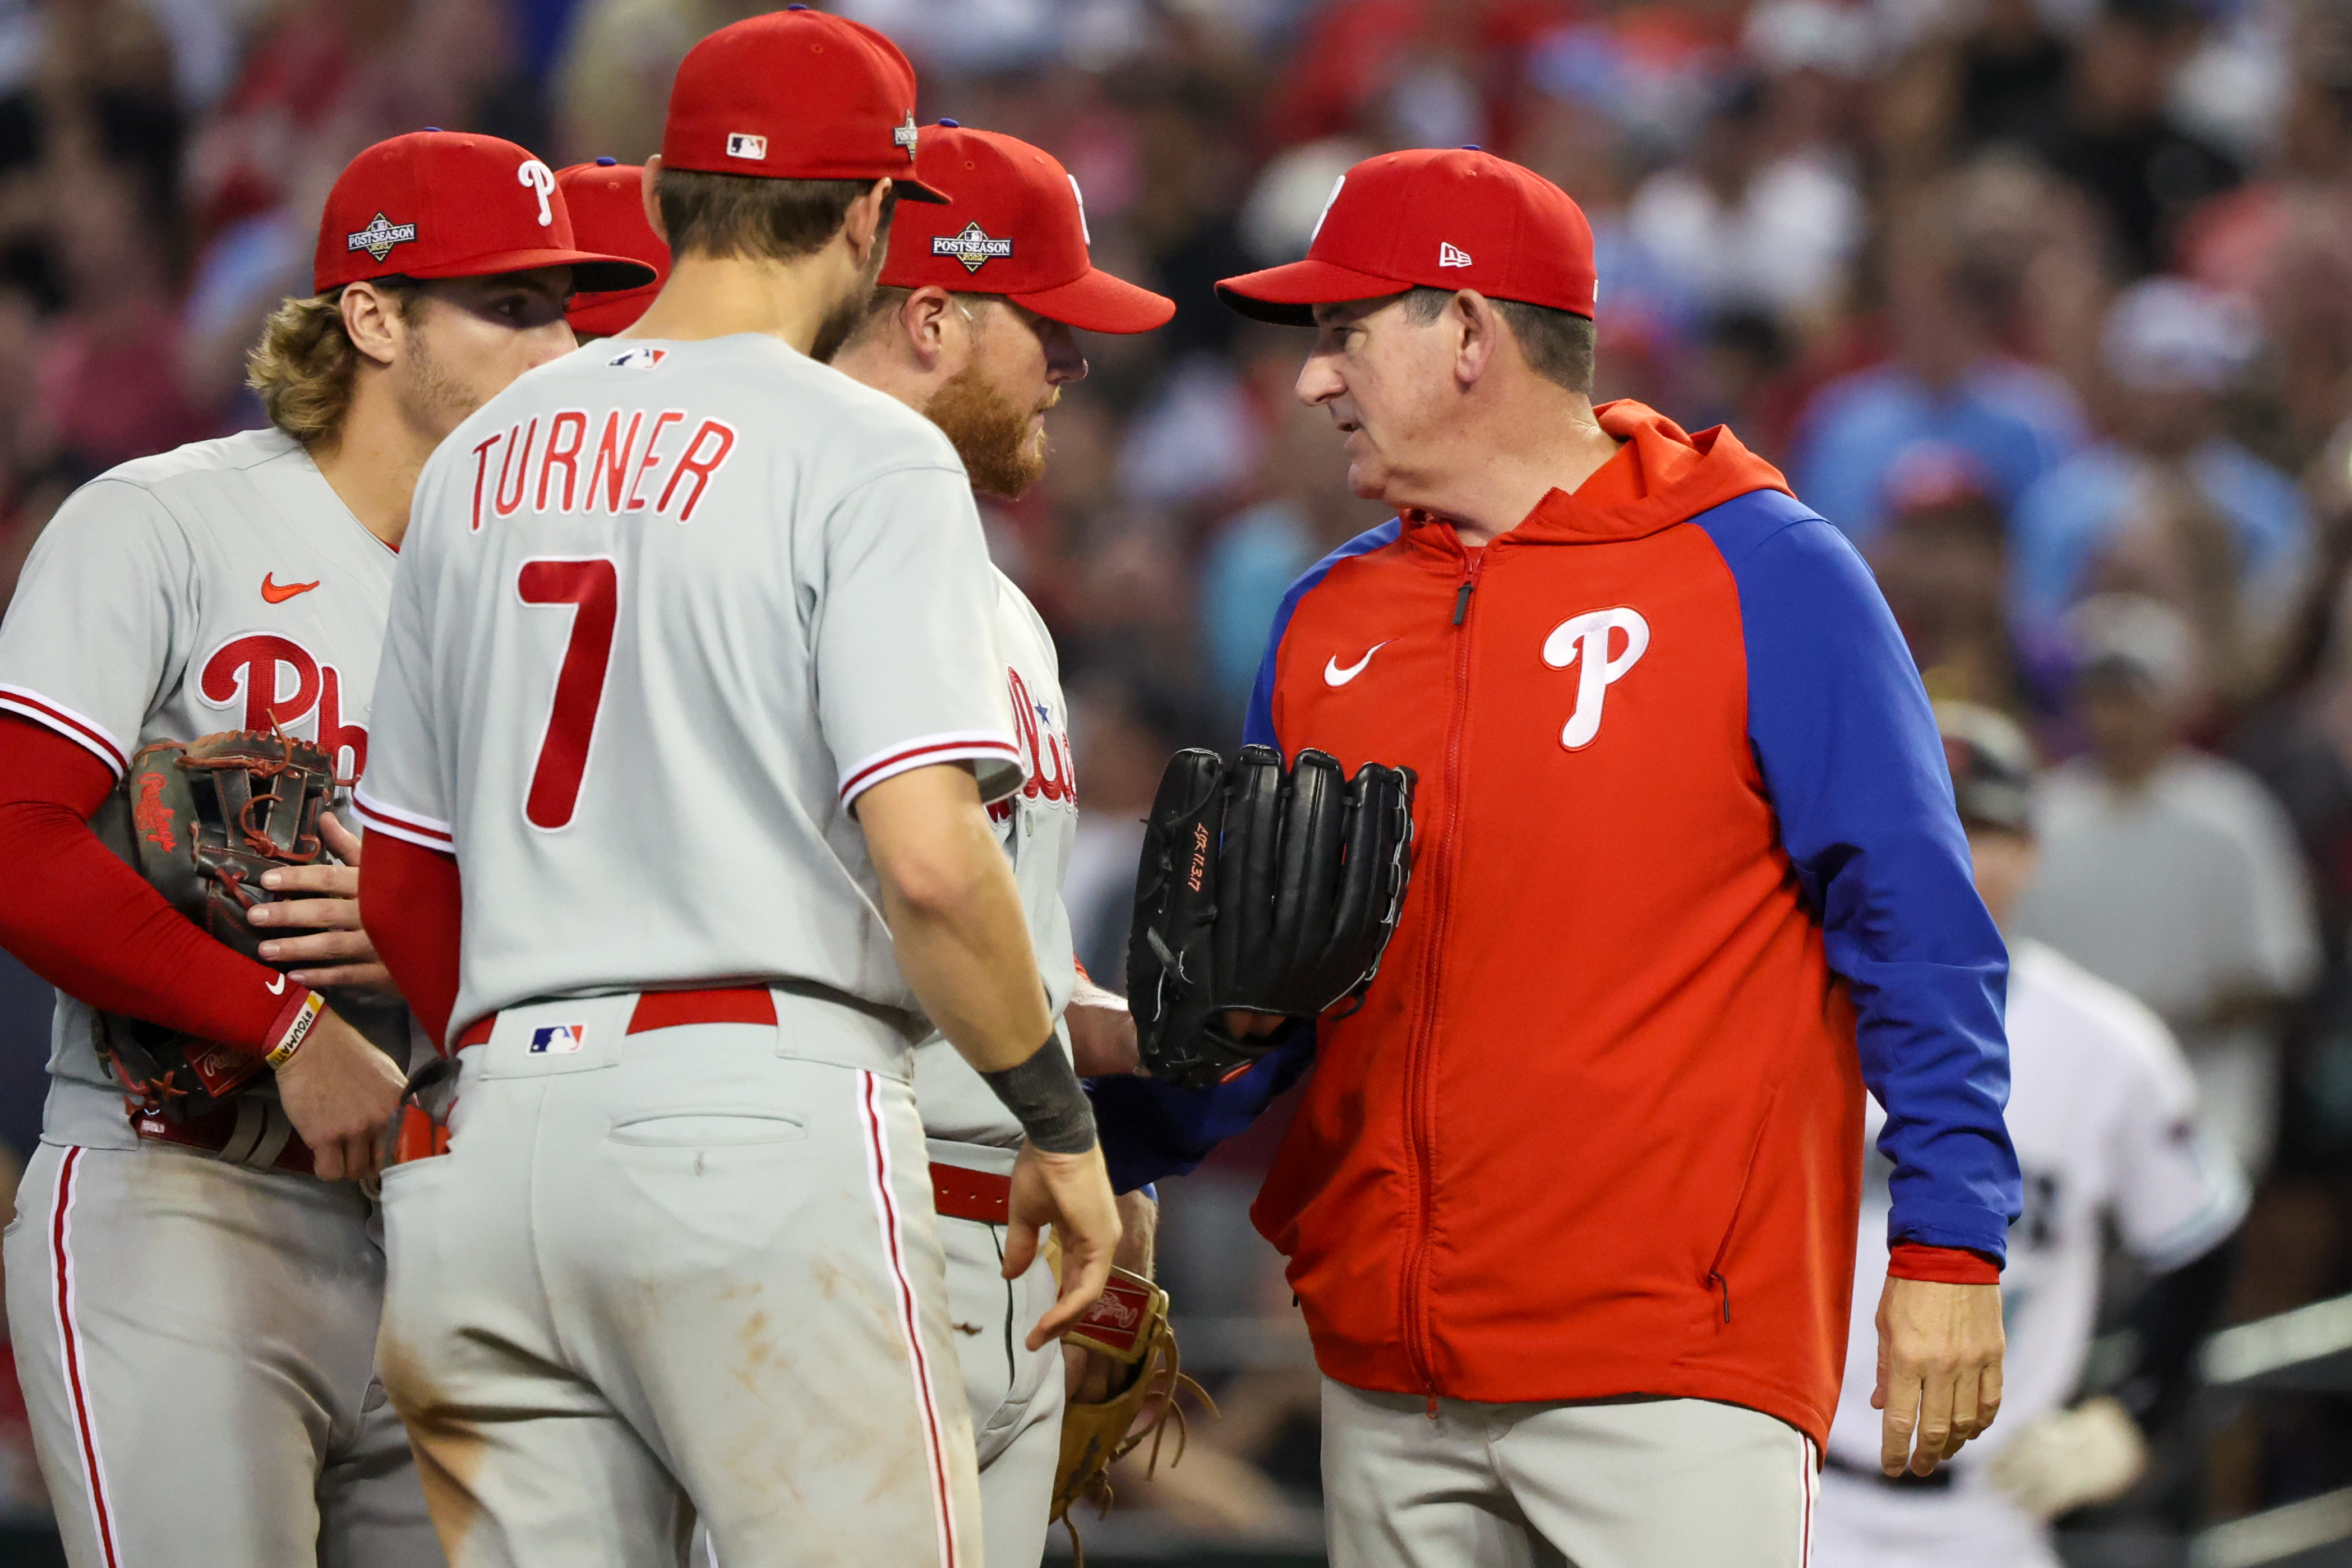 Phillies give credit to the fans, wild atmosphere after advancing